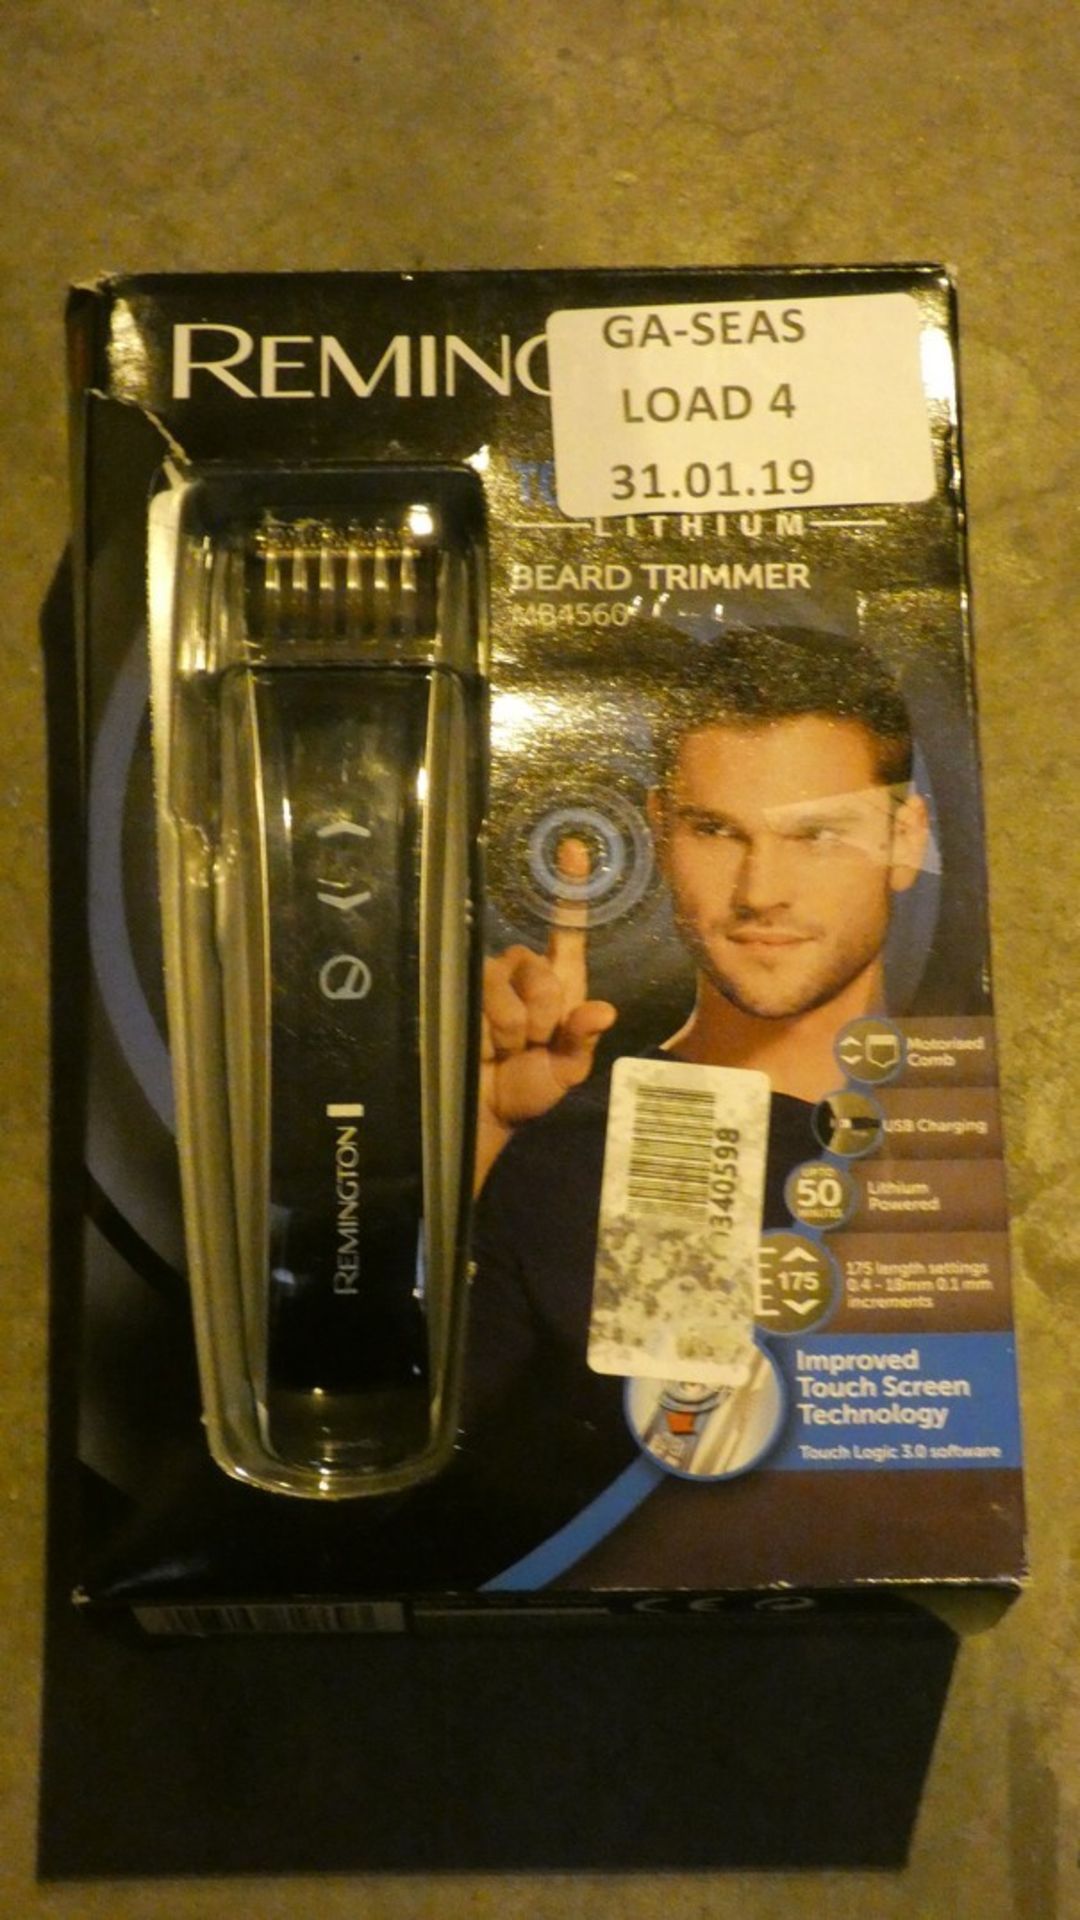 Boxed Remington Touch Control Beard Trimmer RRP £55 (Customer Return)